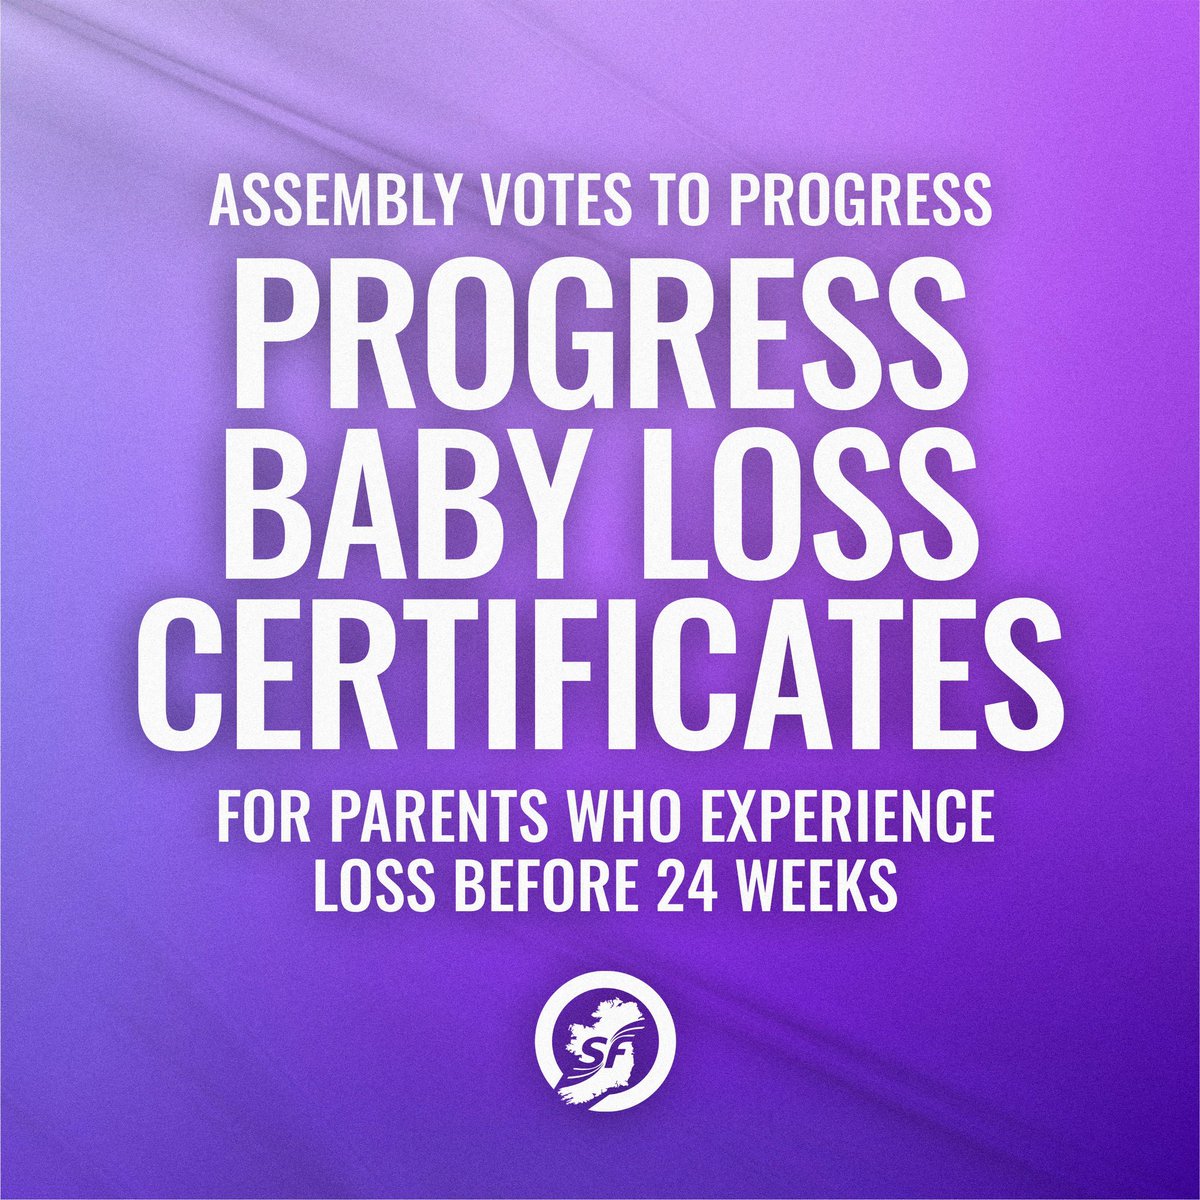 The Assembly has passed Sinn Féin’s motion to progress the Baby Loss Certificate scheme. The development of a Baby Loss Certificate scheme would ensure that bereaved parents can have an official document acknowledging a baby lost during pregnancy before 24 weeks. #WorkingForAll